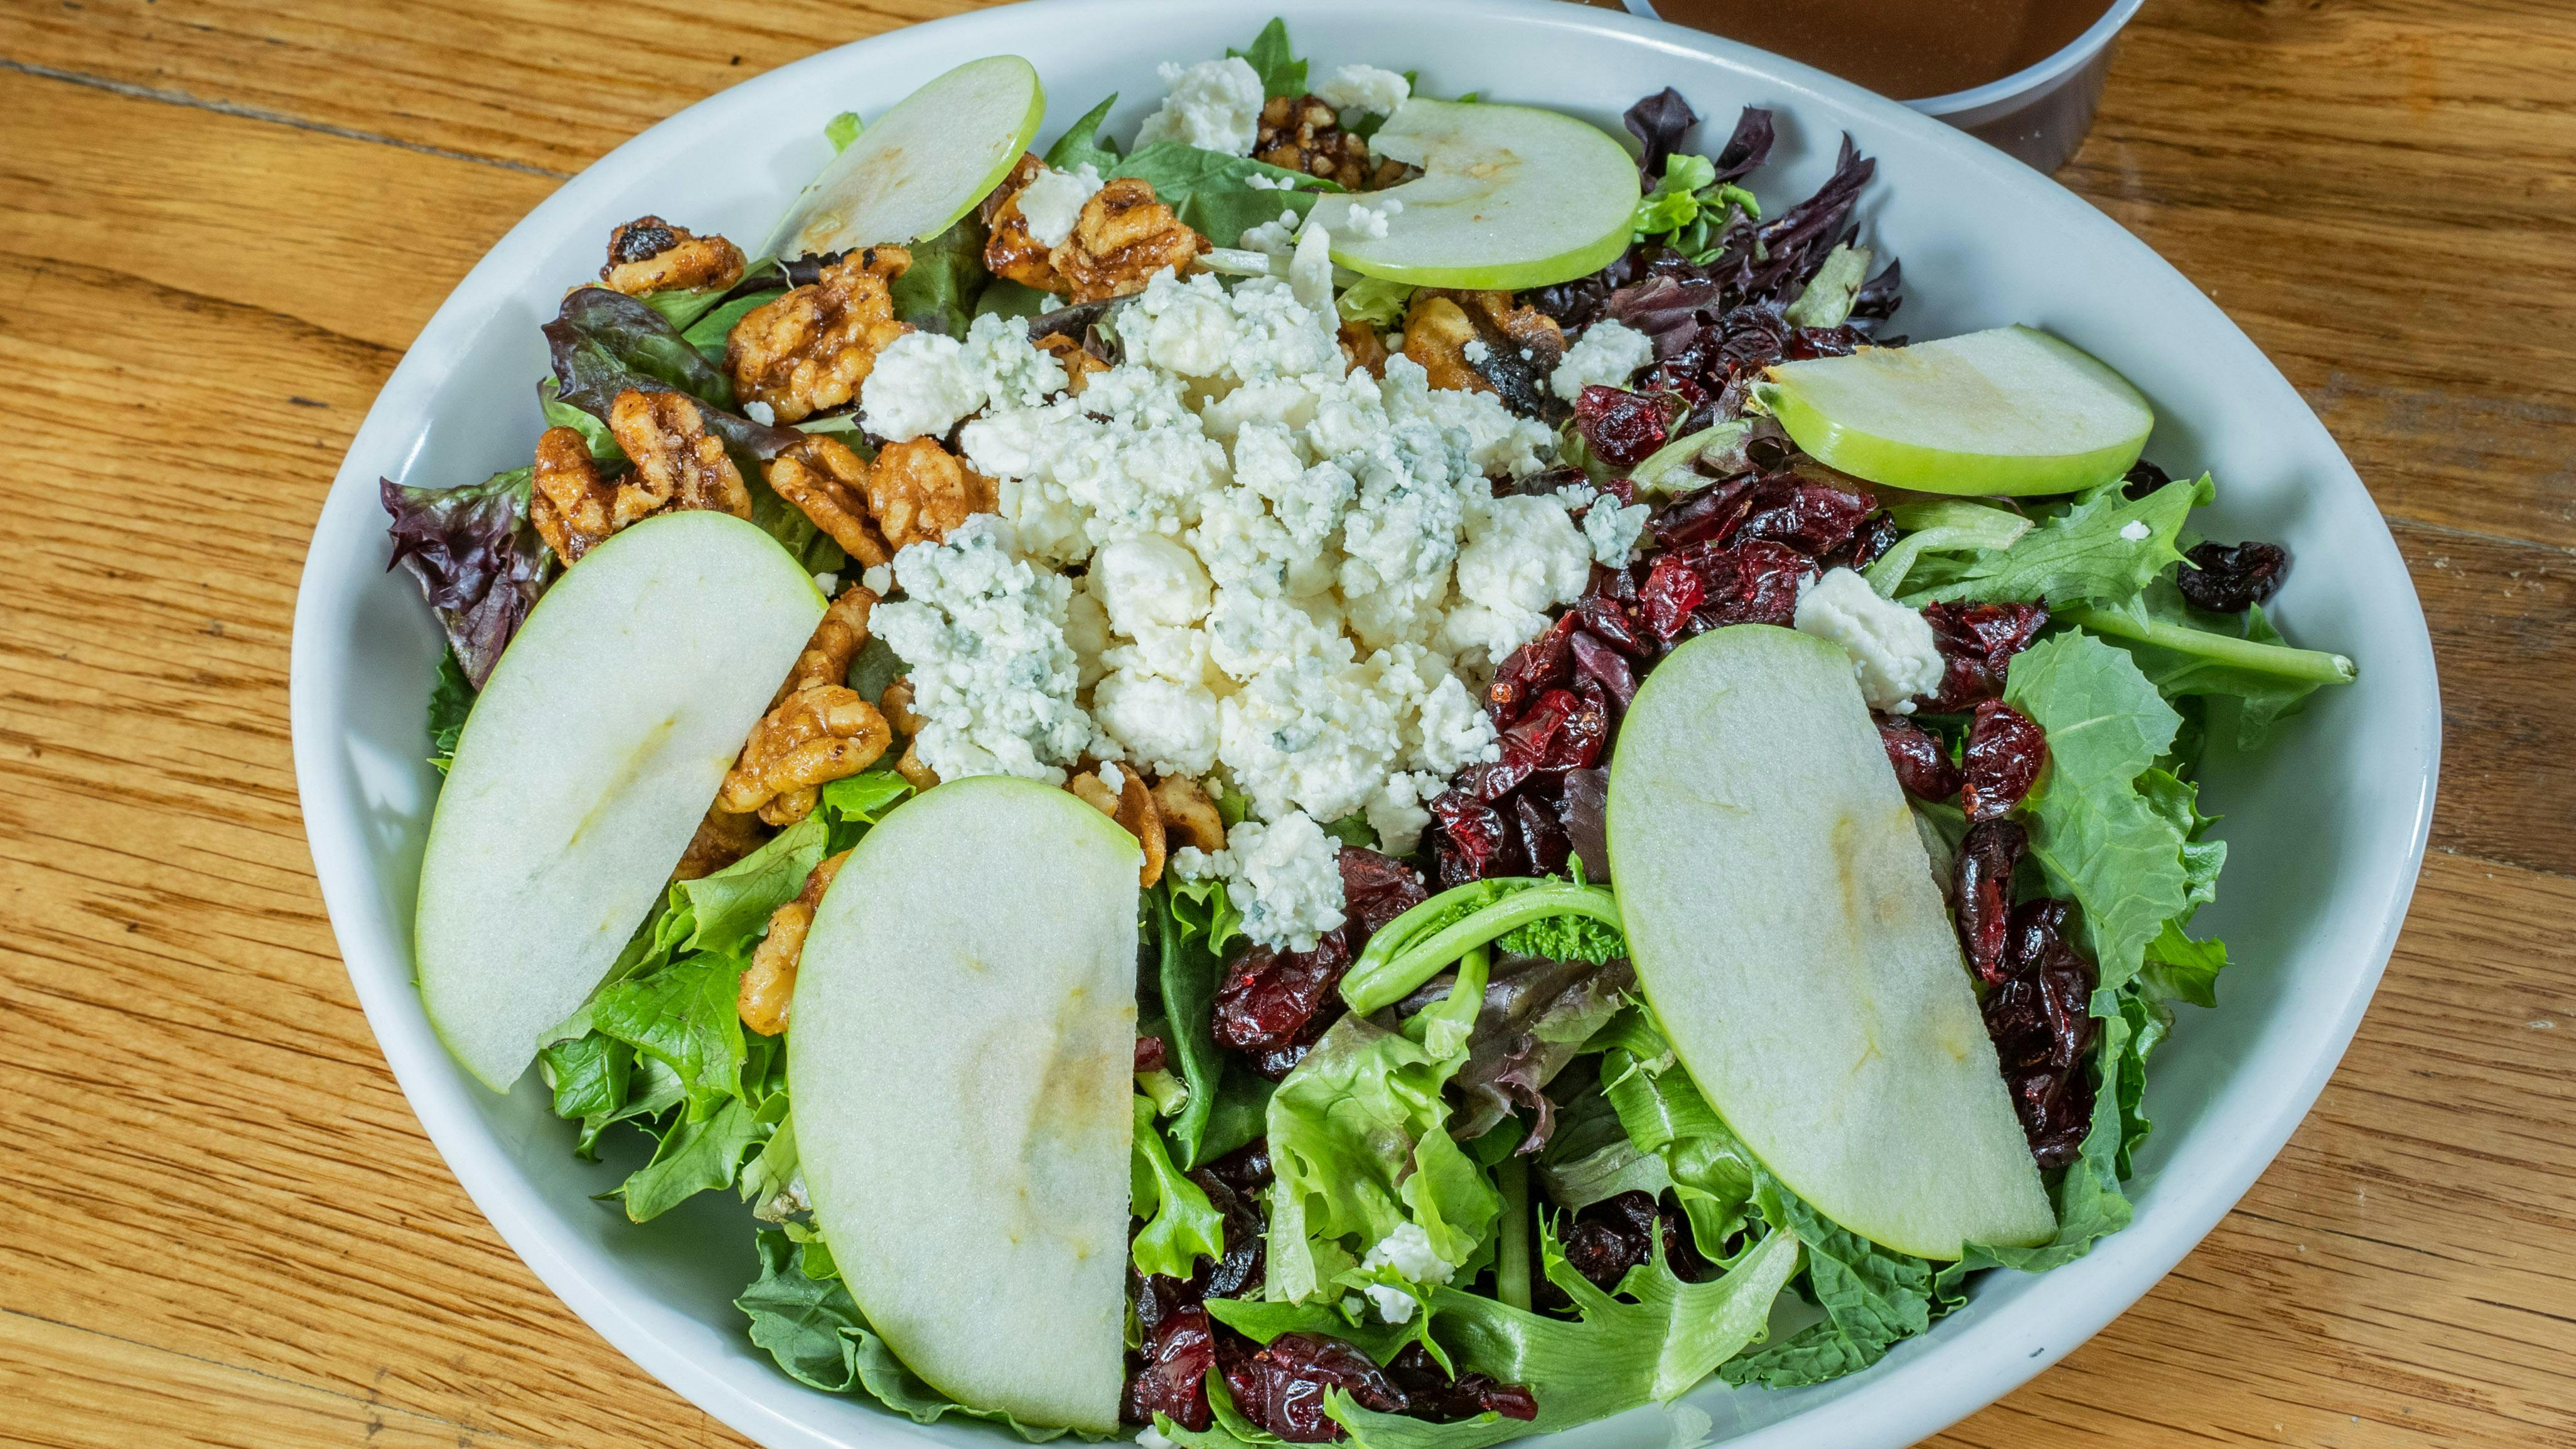 Bleu Cheese Salad from Austin Wing Company - East 6th St in Austin, TX